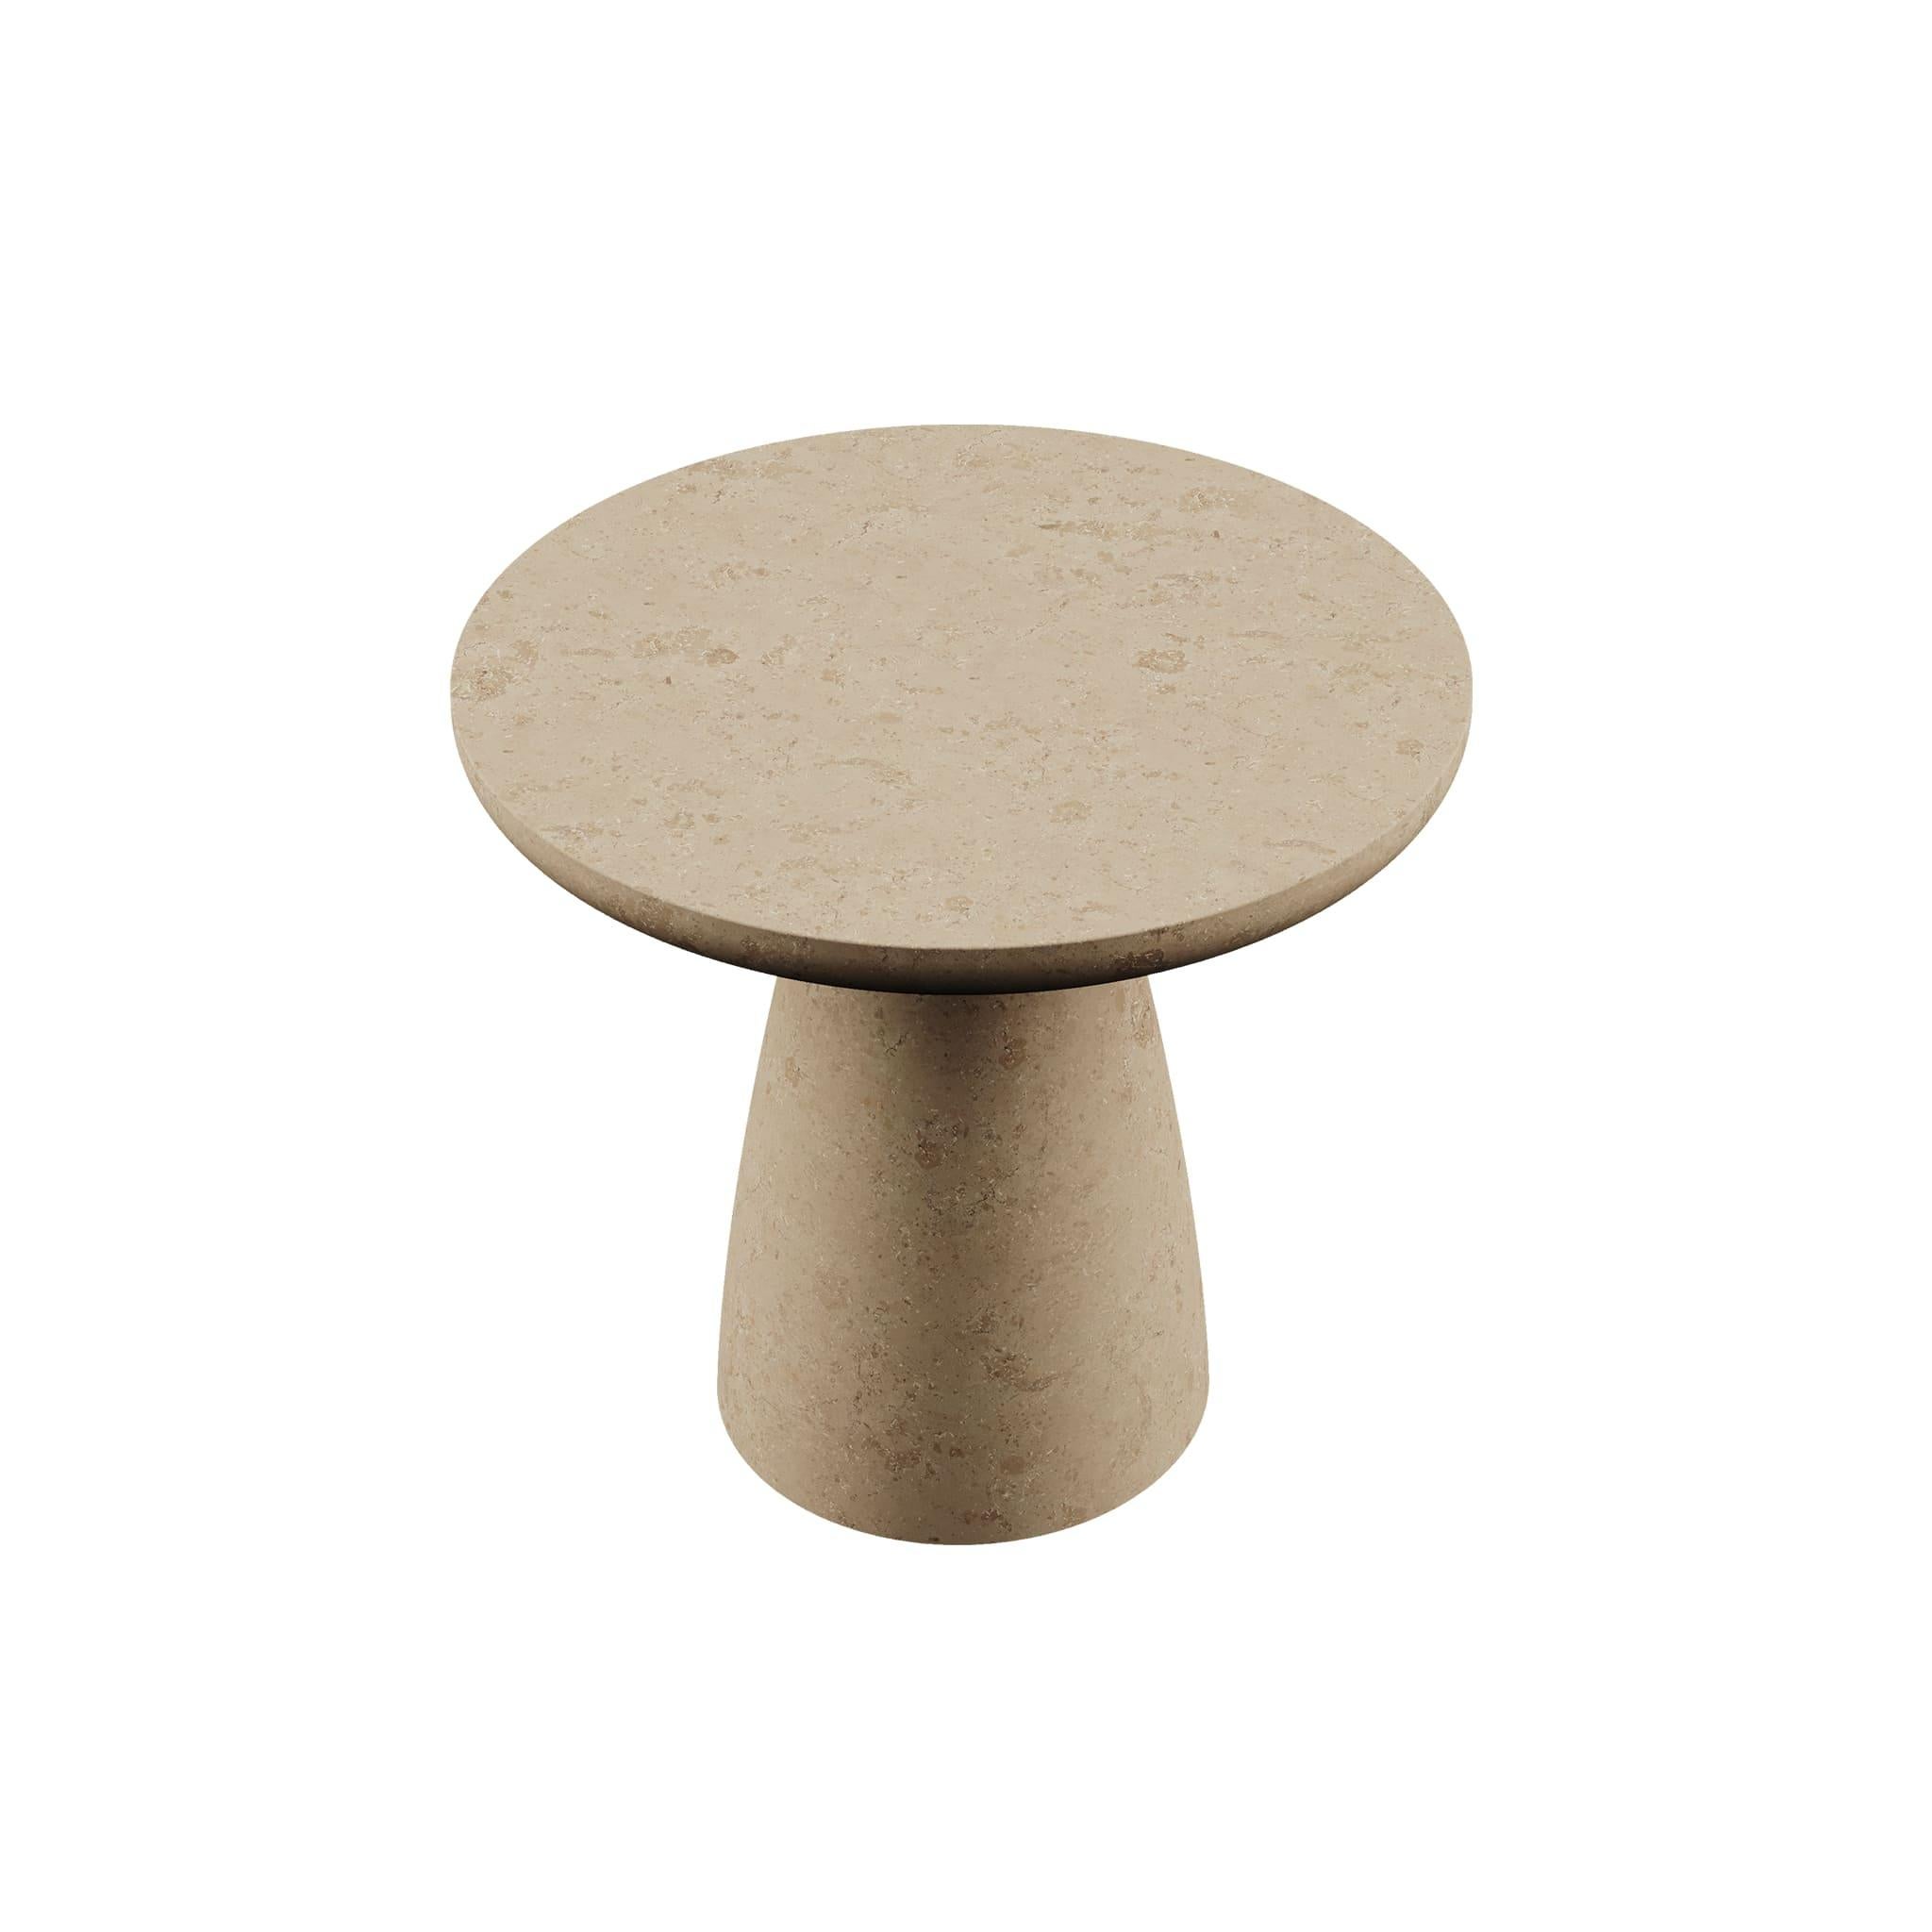 Lunarys Large Side Table Natural is a modern outdoor piece, the stone side table’s body and legs are crafted in natural sandblaster beige limestone, delivering a raw yet luxurious style to any contemporary outdoor project.

Materials: Body and